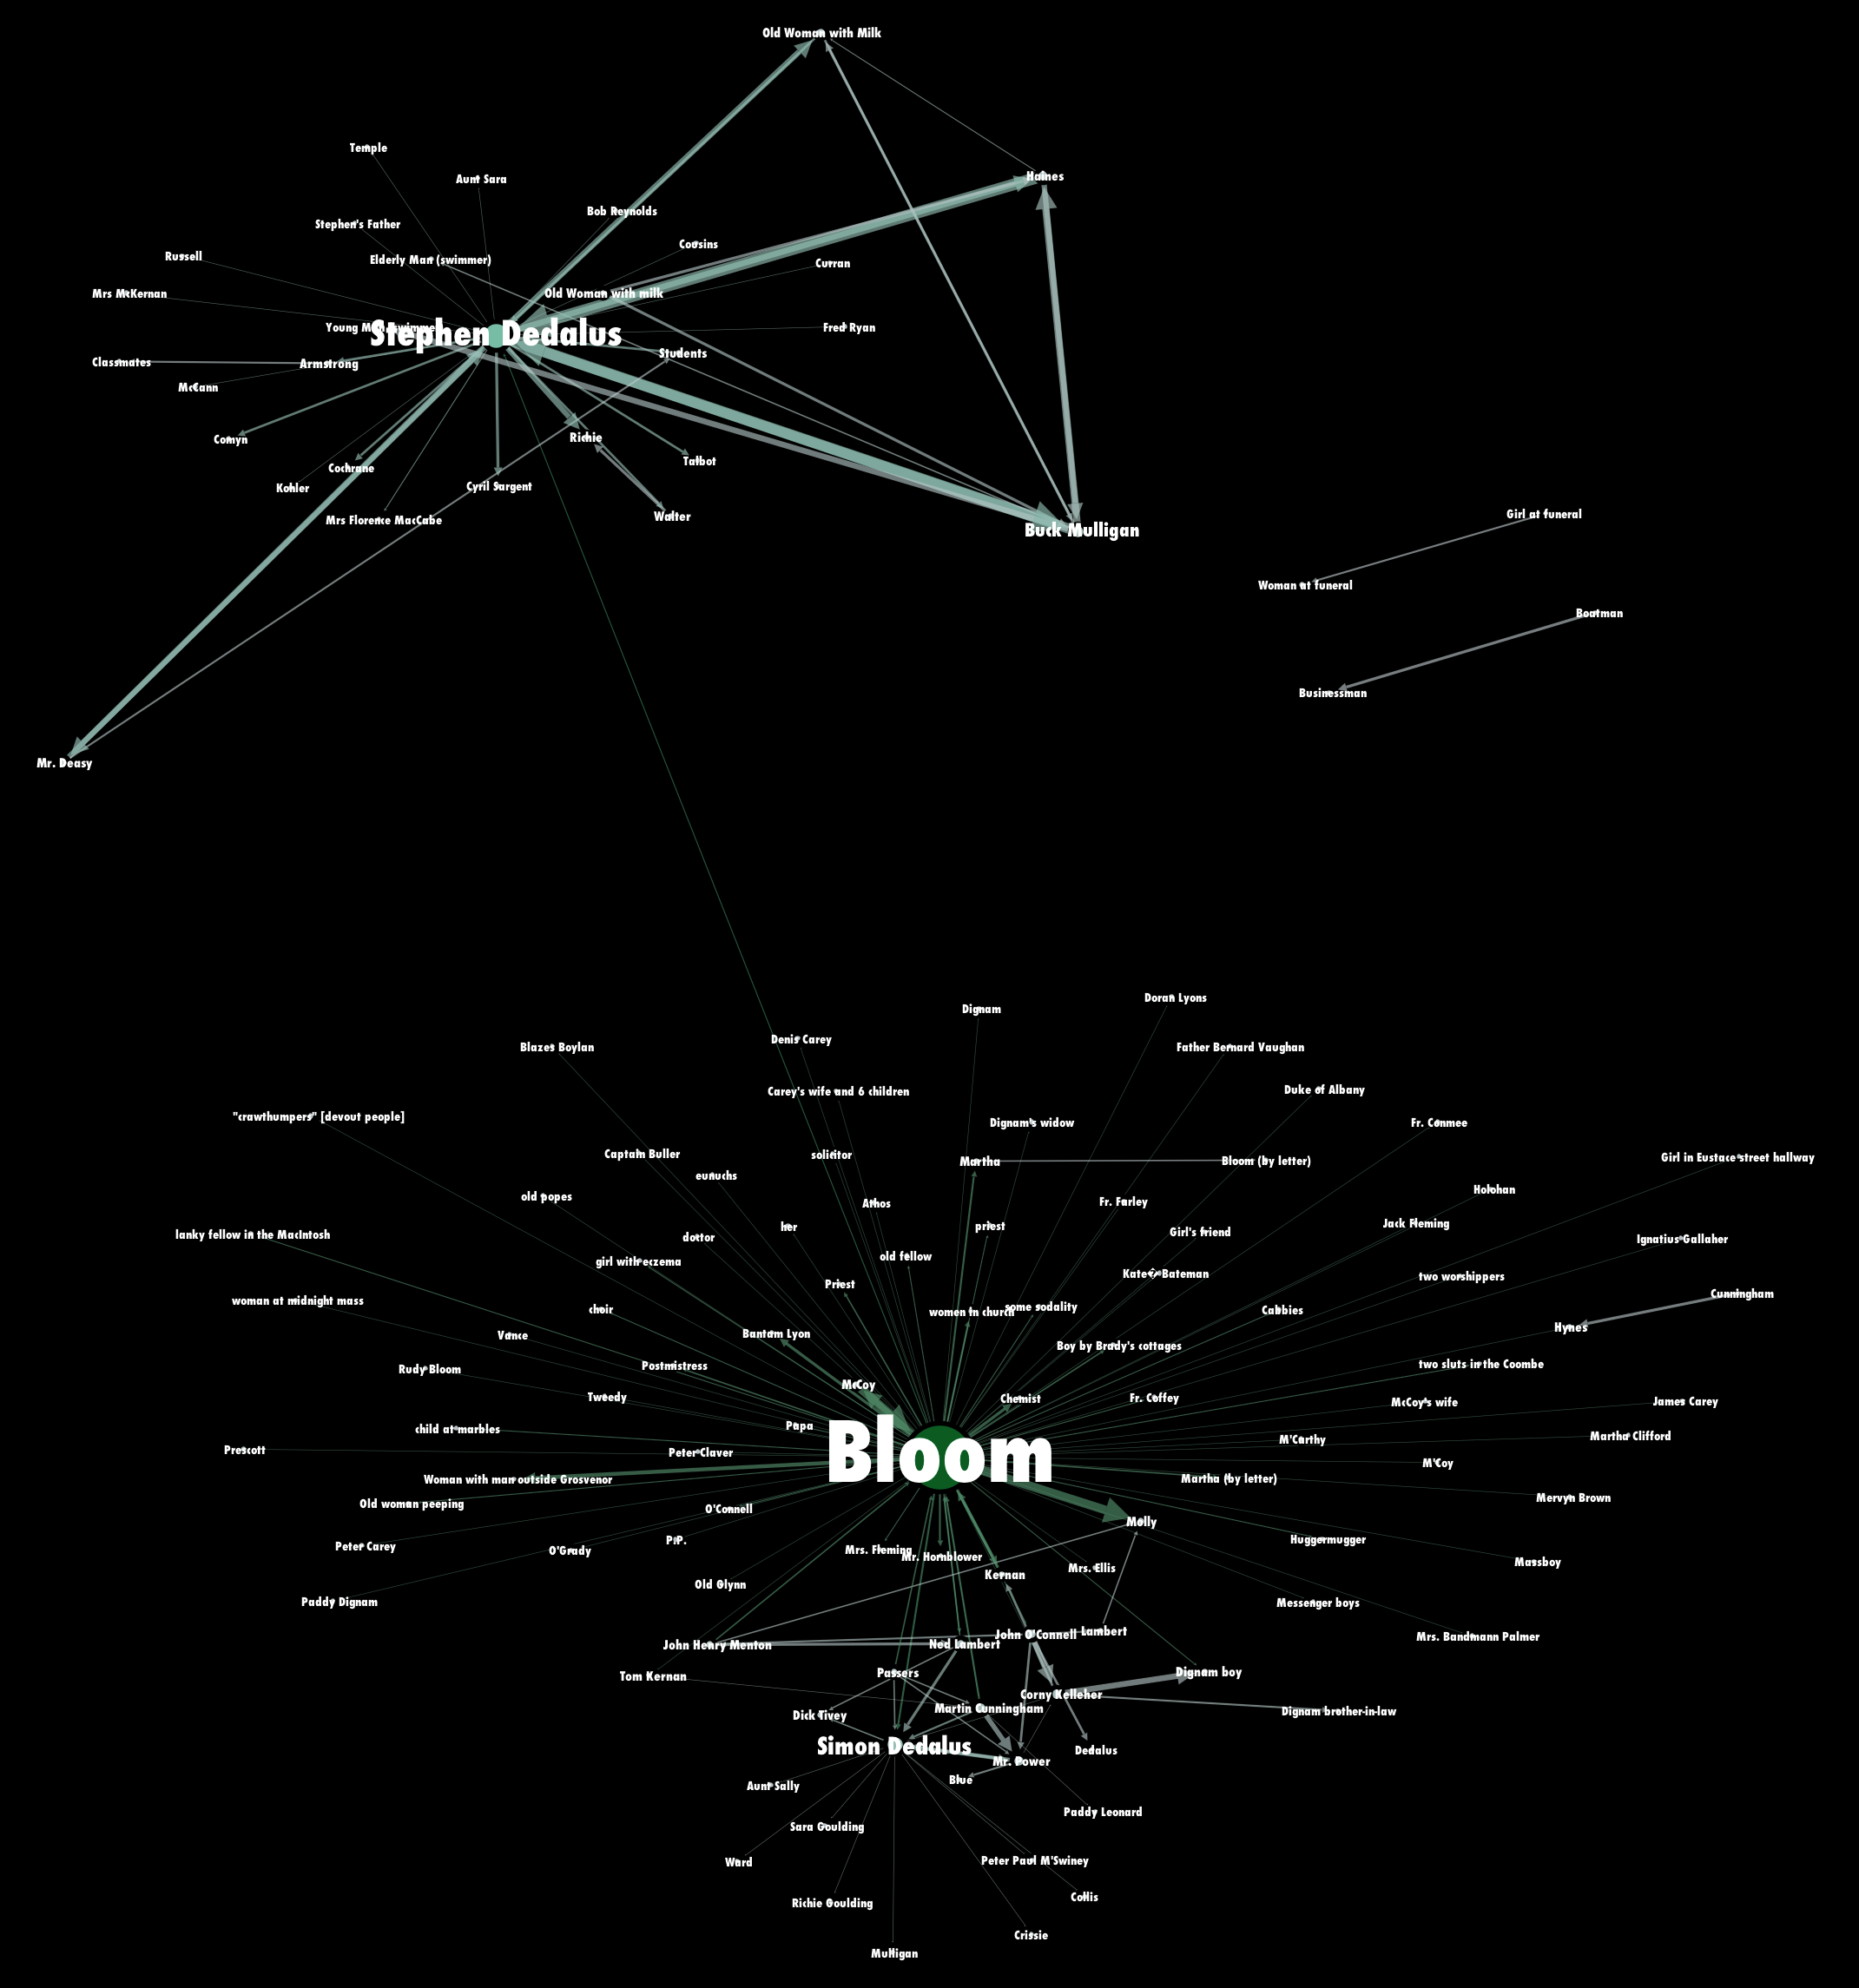 Information visualization of some early selections from James Joyce's novel Ulysses